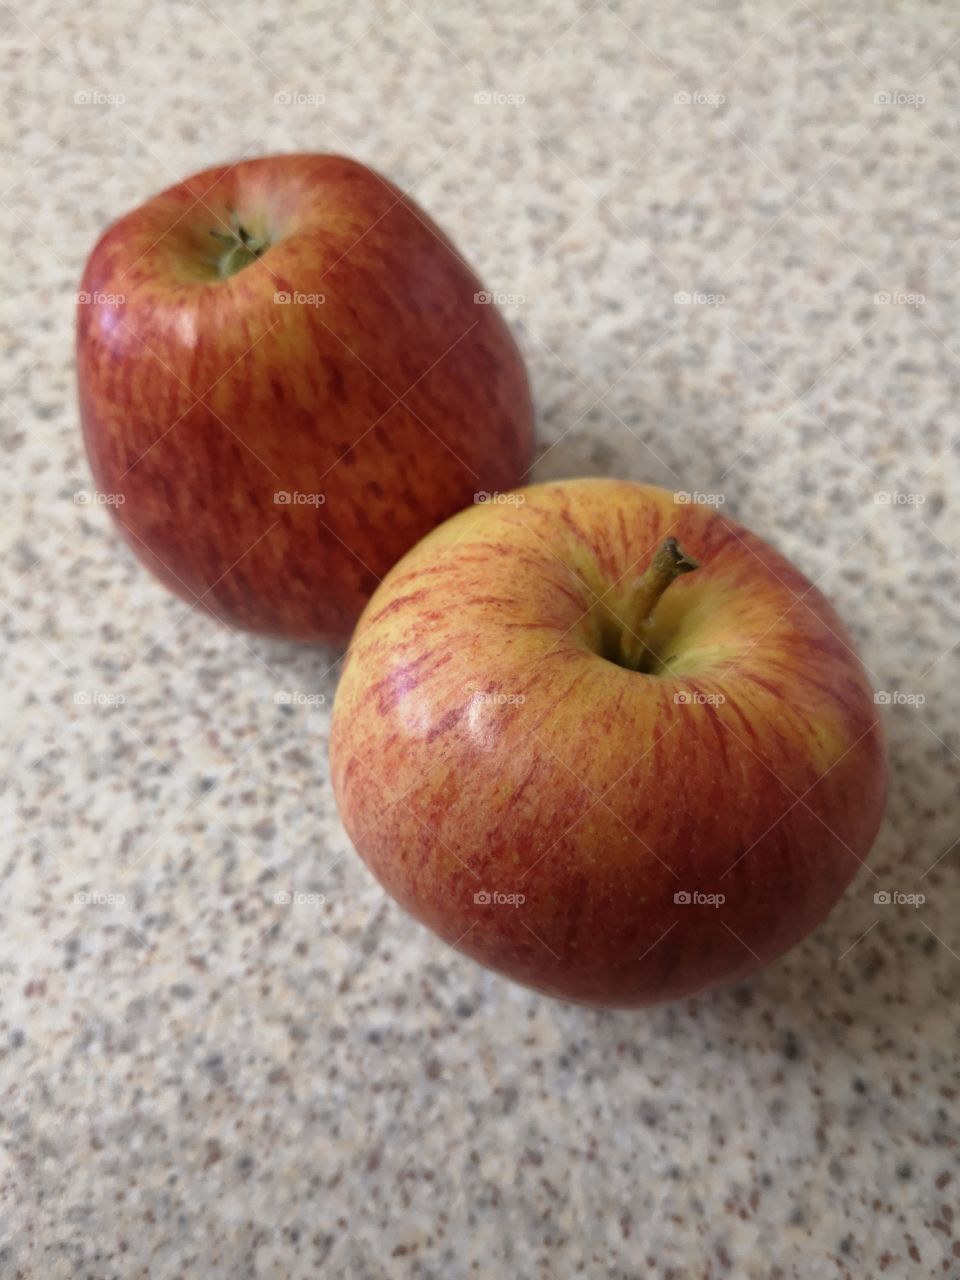 Two apples side by side